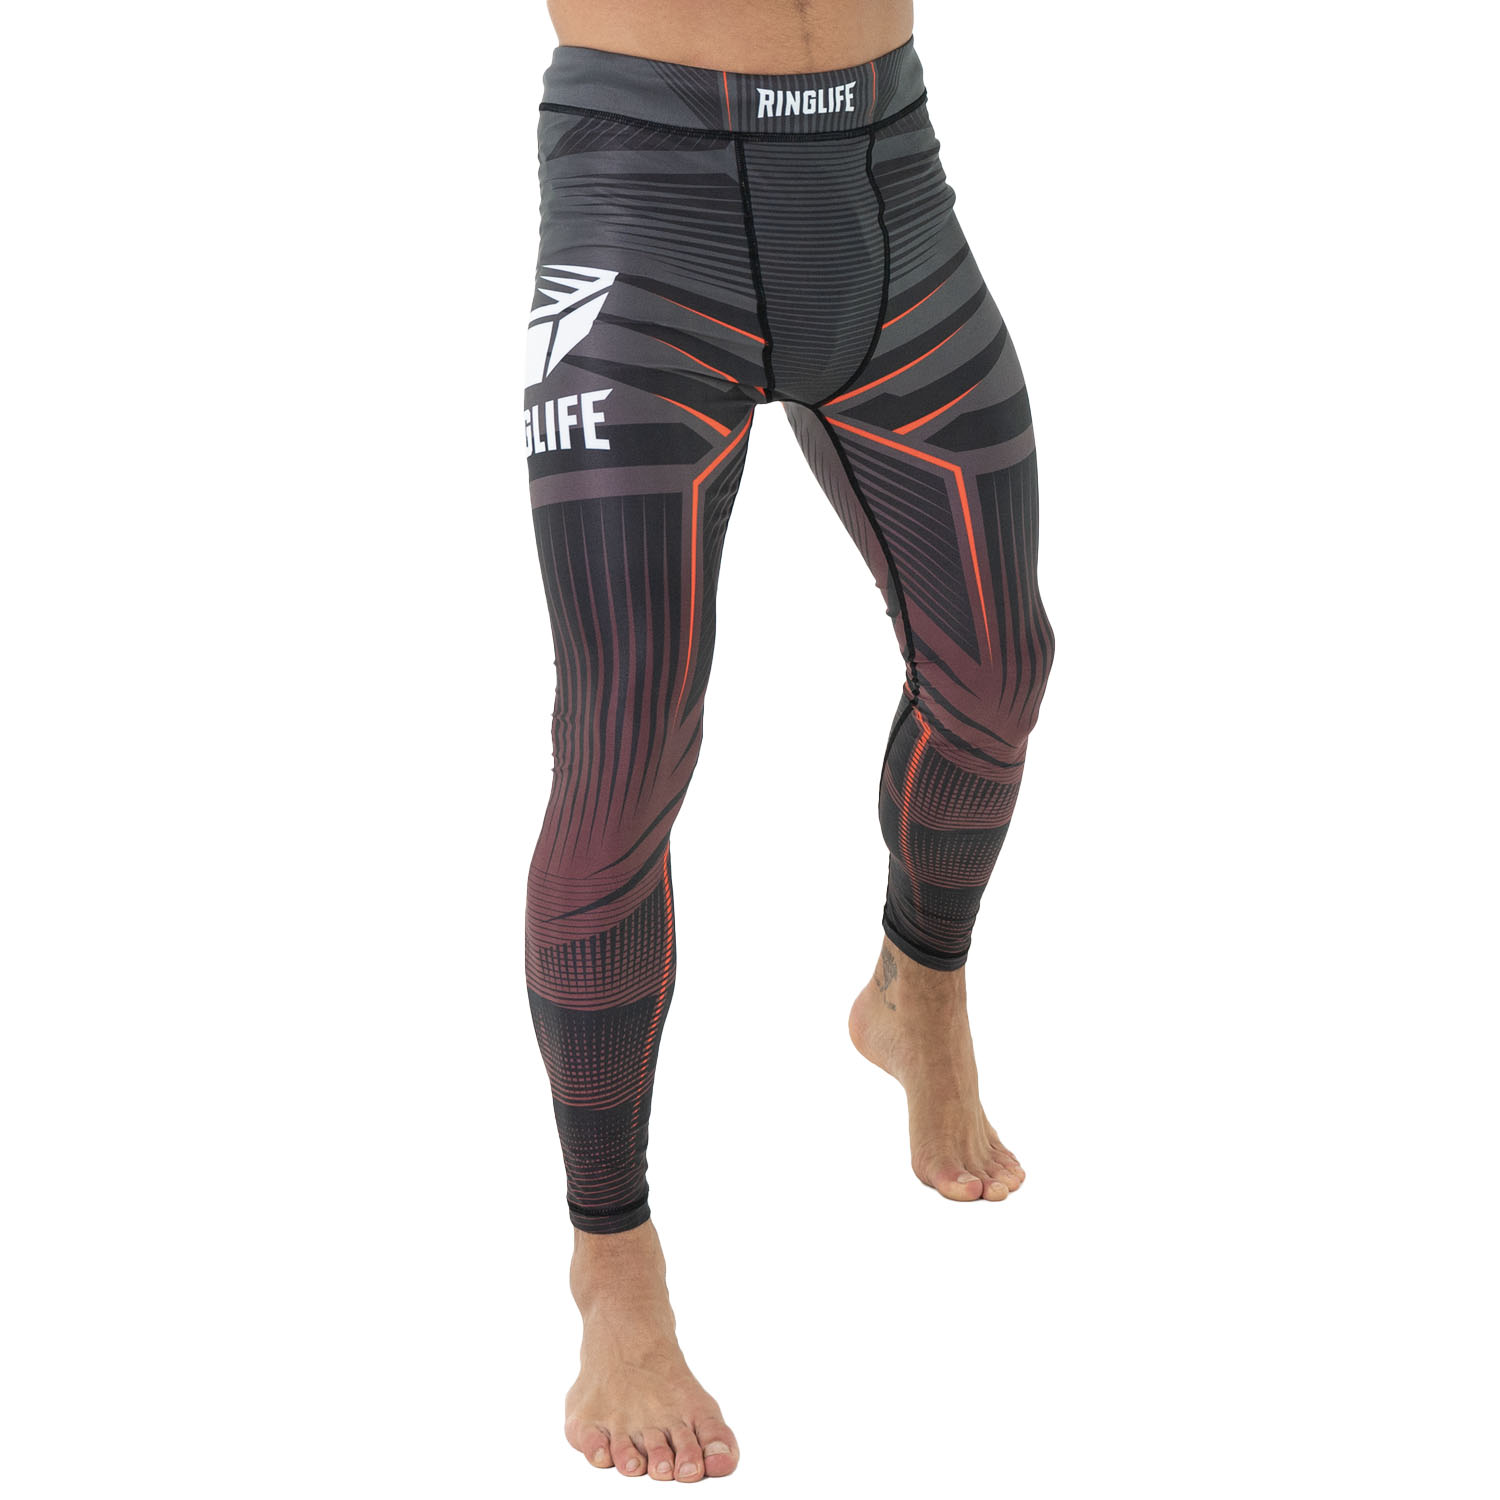 RINGLIFE Compression Pants - Octaring black-red